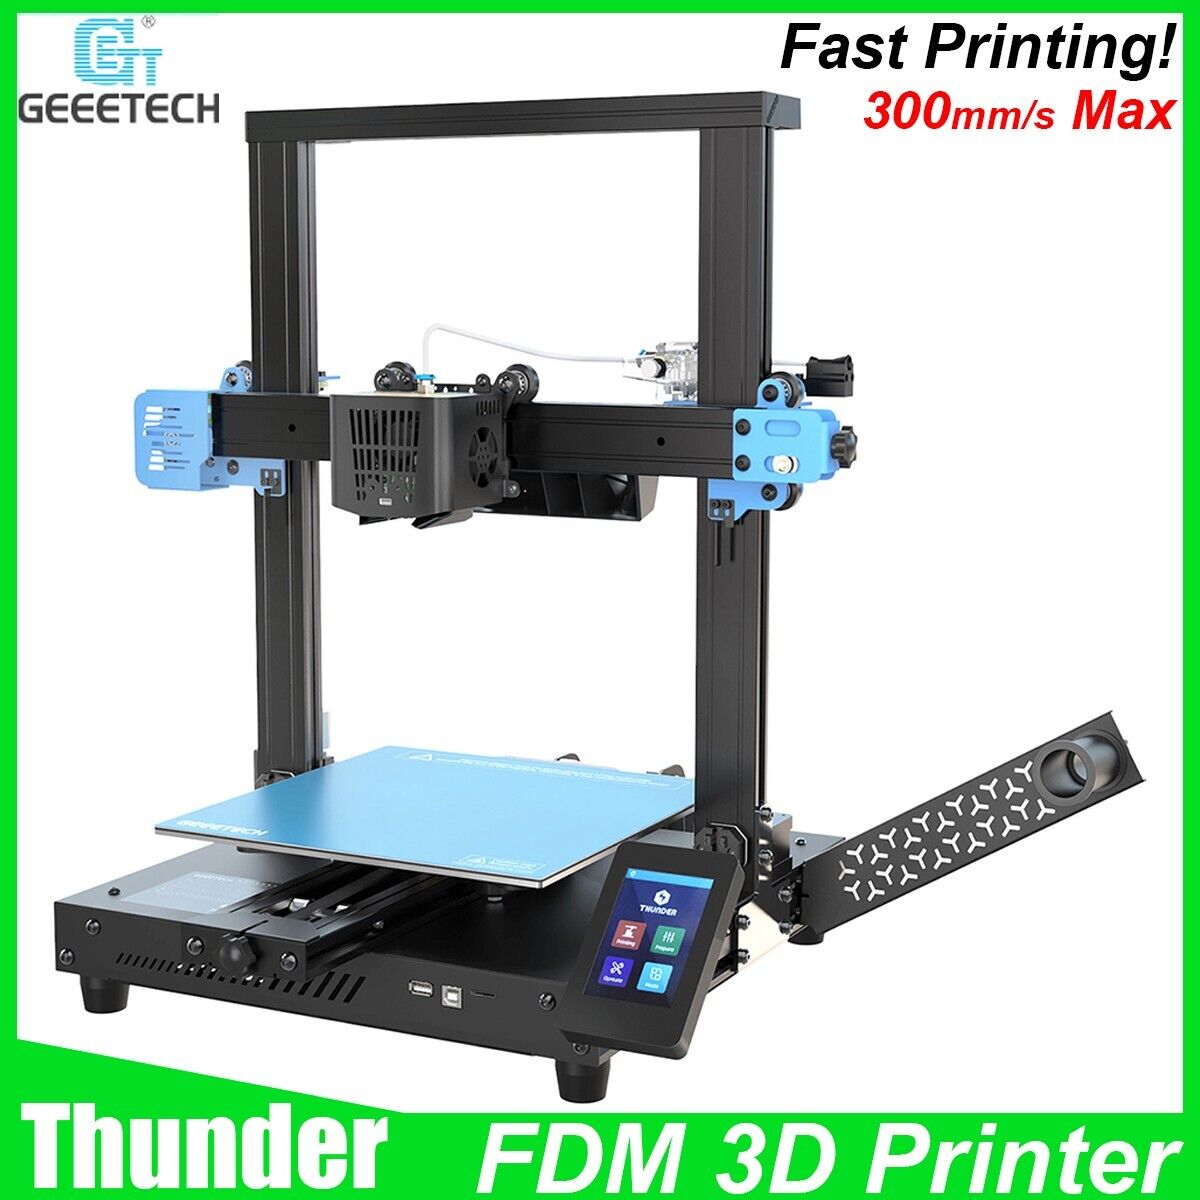 Geeetech Thunder 3D Printer 300mm/s High Speed Printing Support Auto-Leveling US